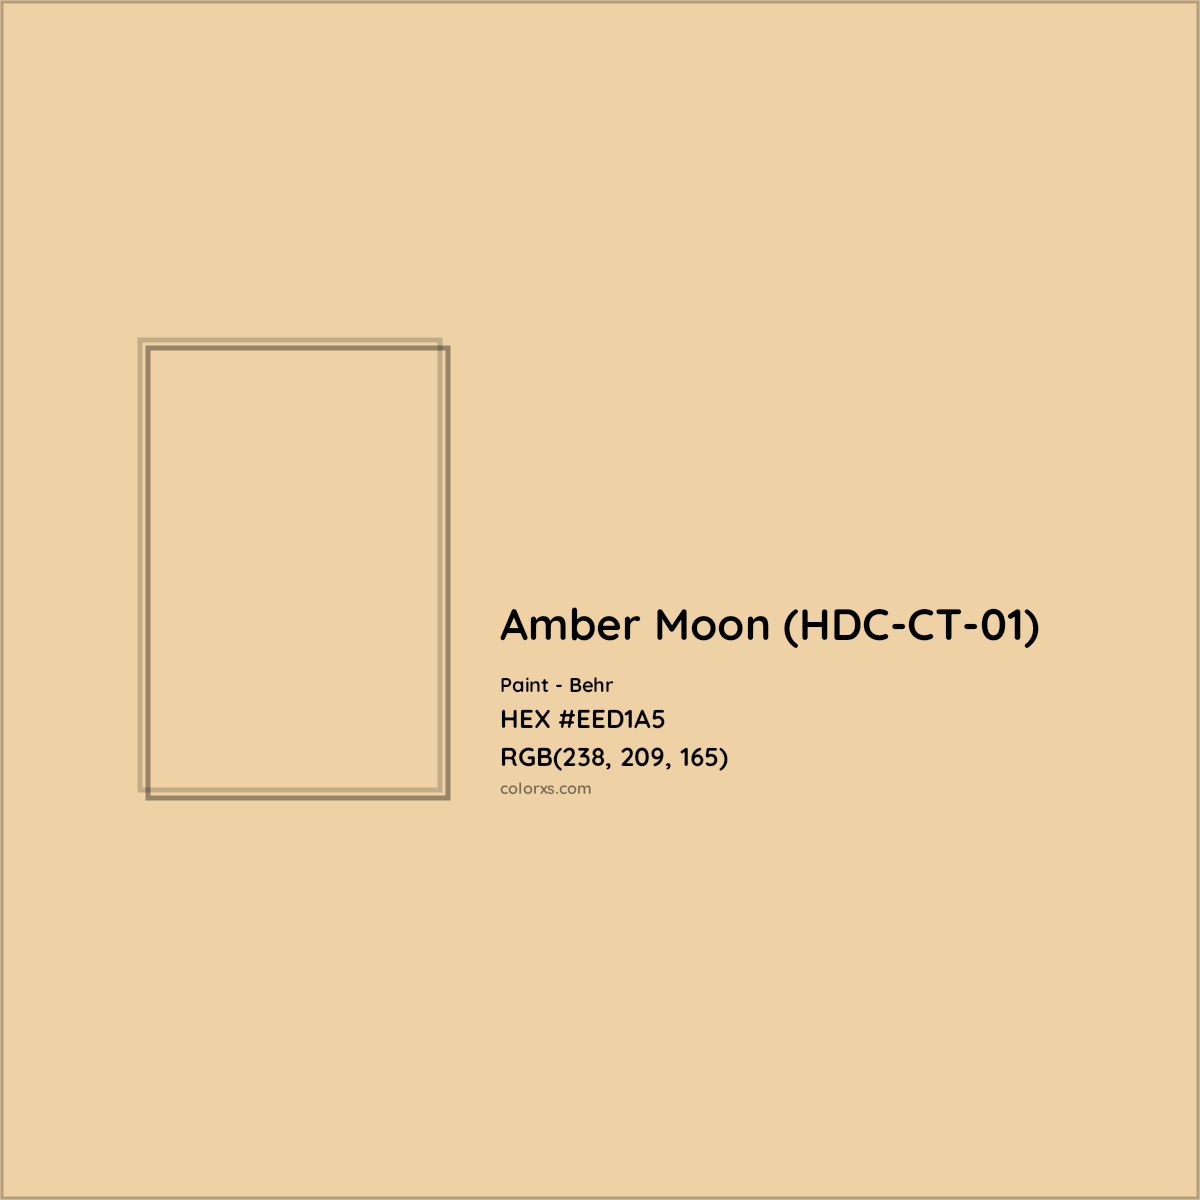 HEX #EED1A5 Amber Moon (HDC-CT-01) Paint Behr - Color Code